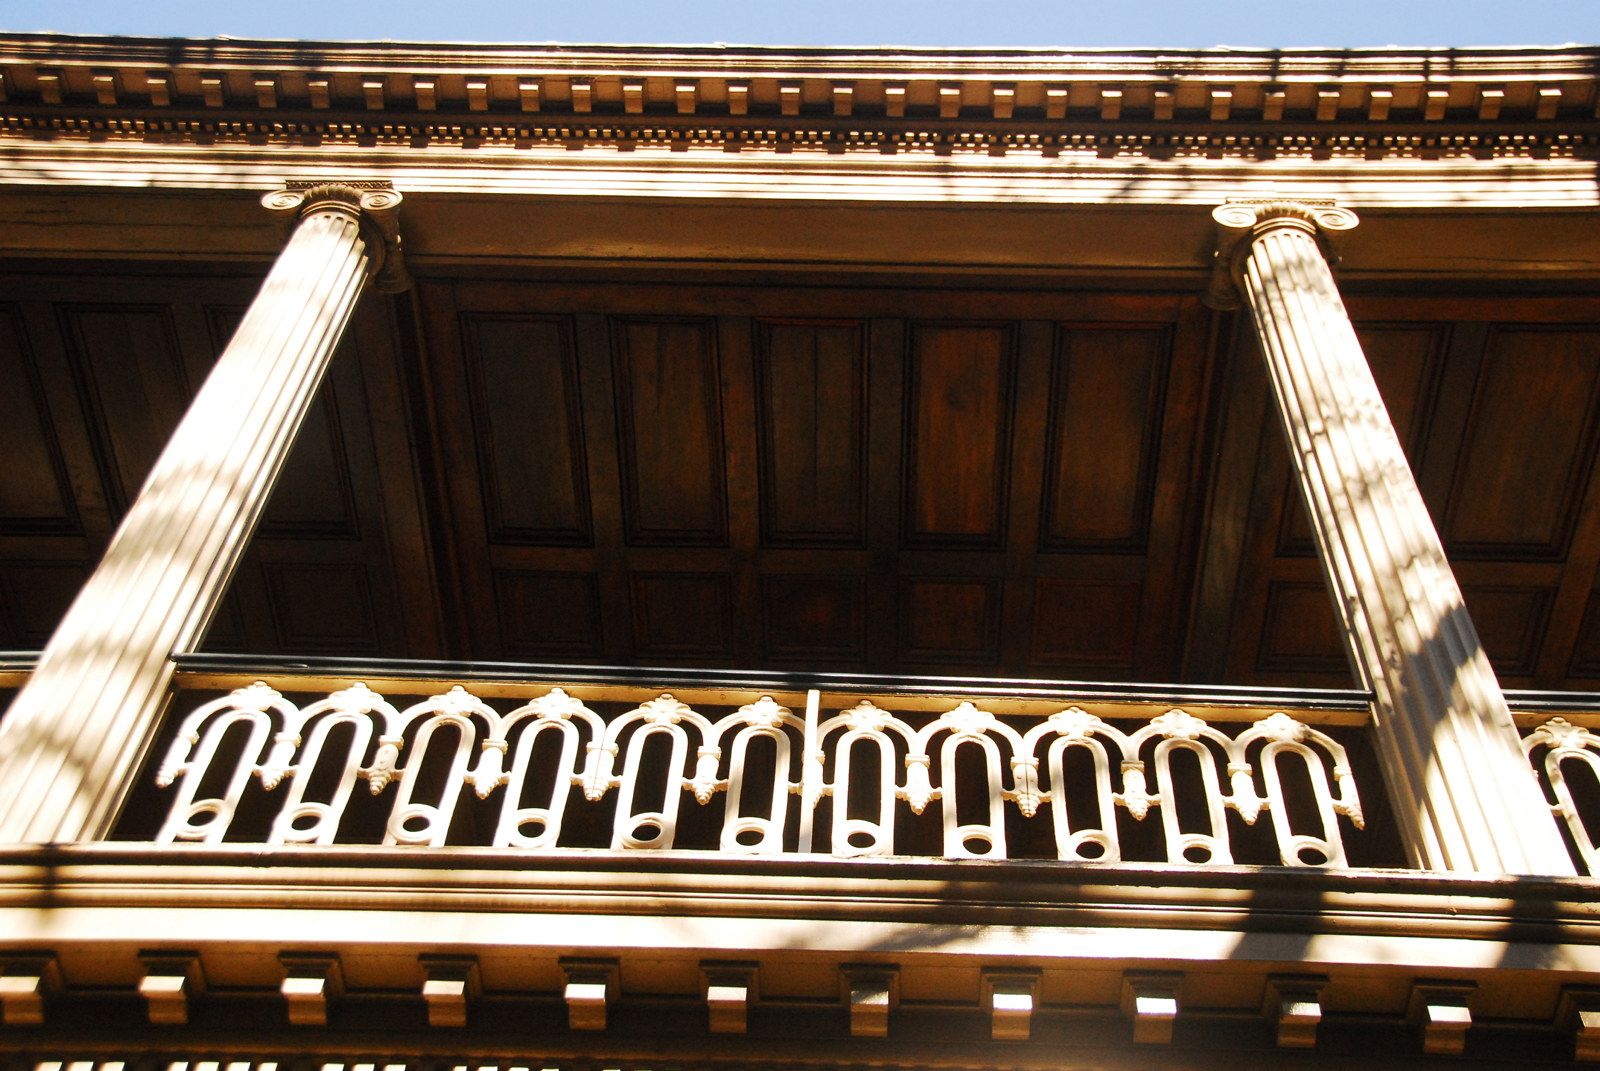 Looking up at darkened verandah, with columns, ironwork and two columns highlighted by sunlight.